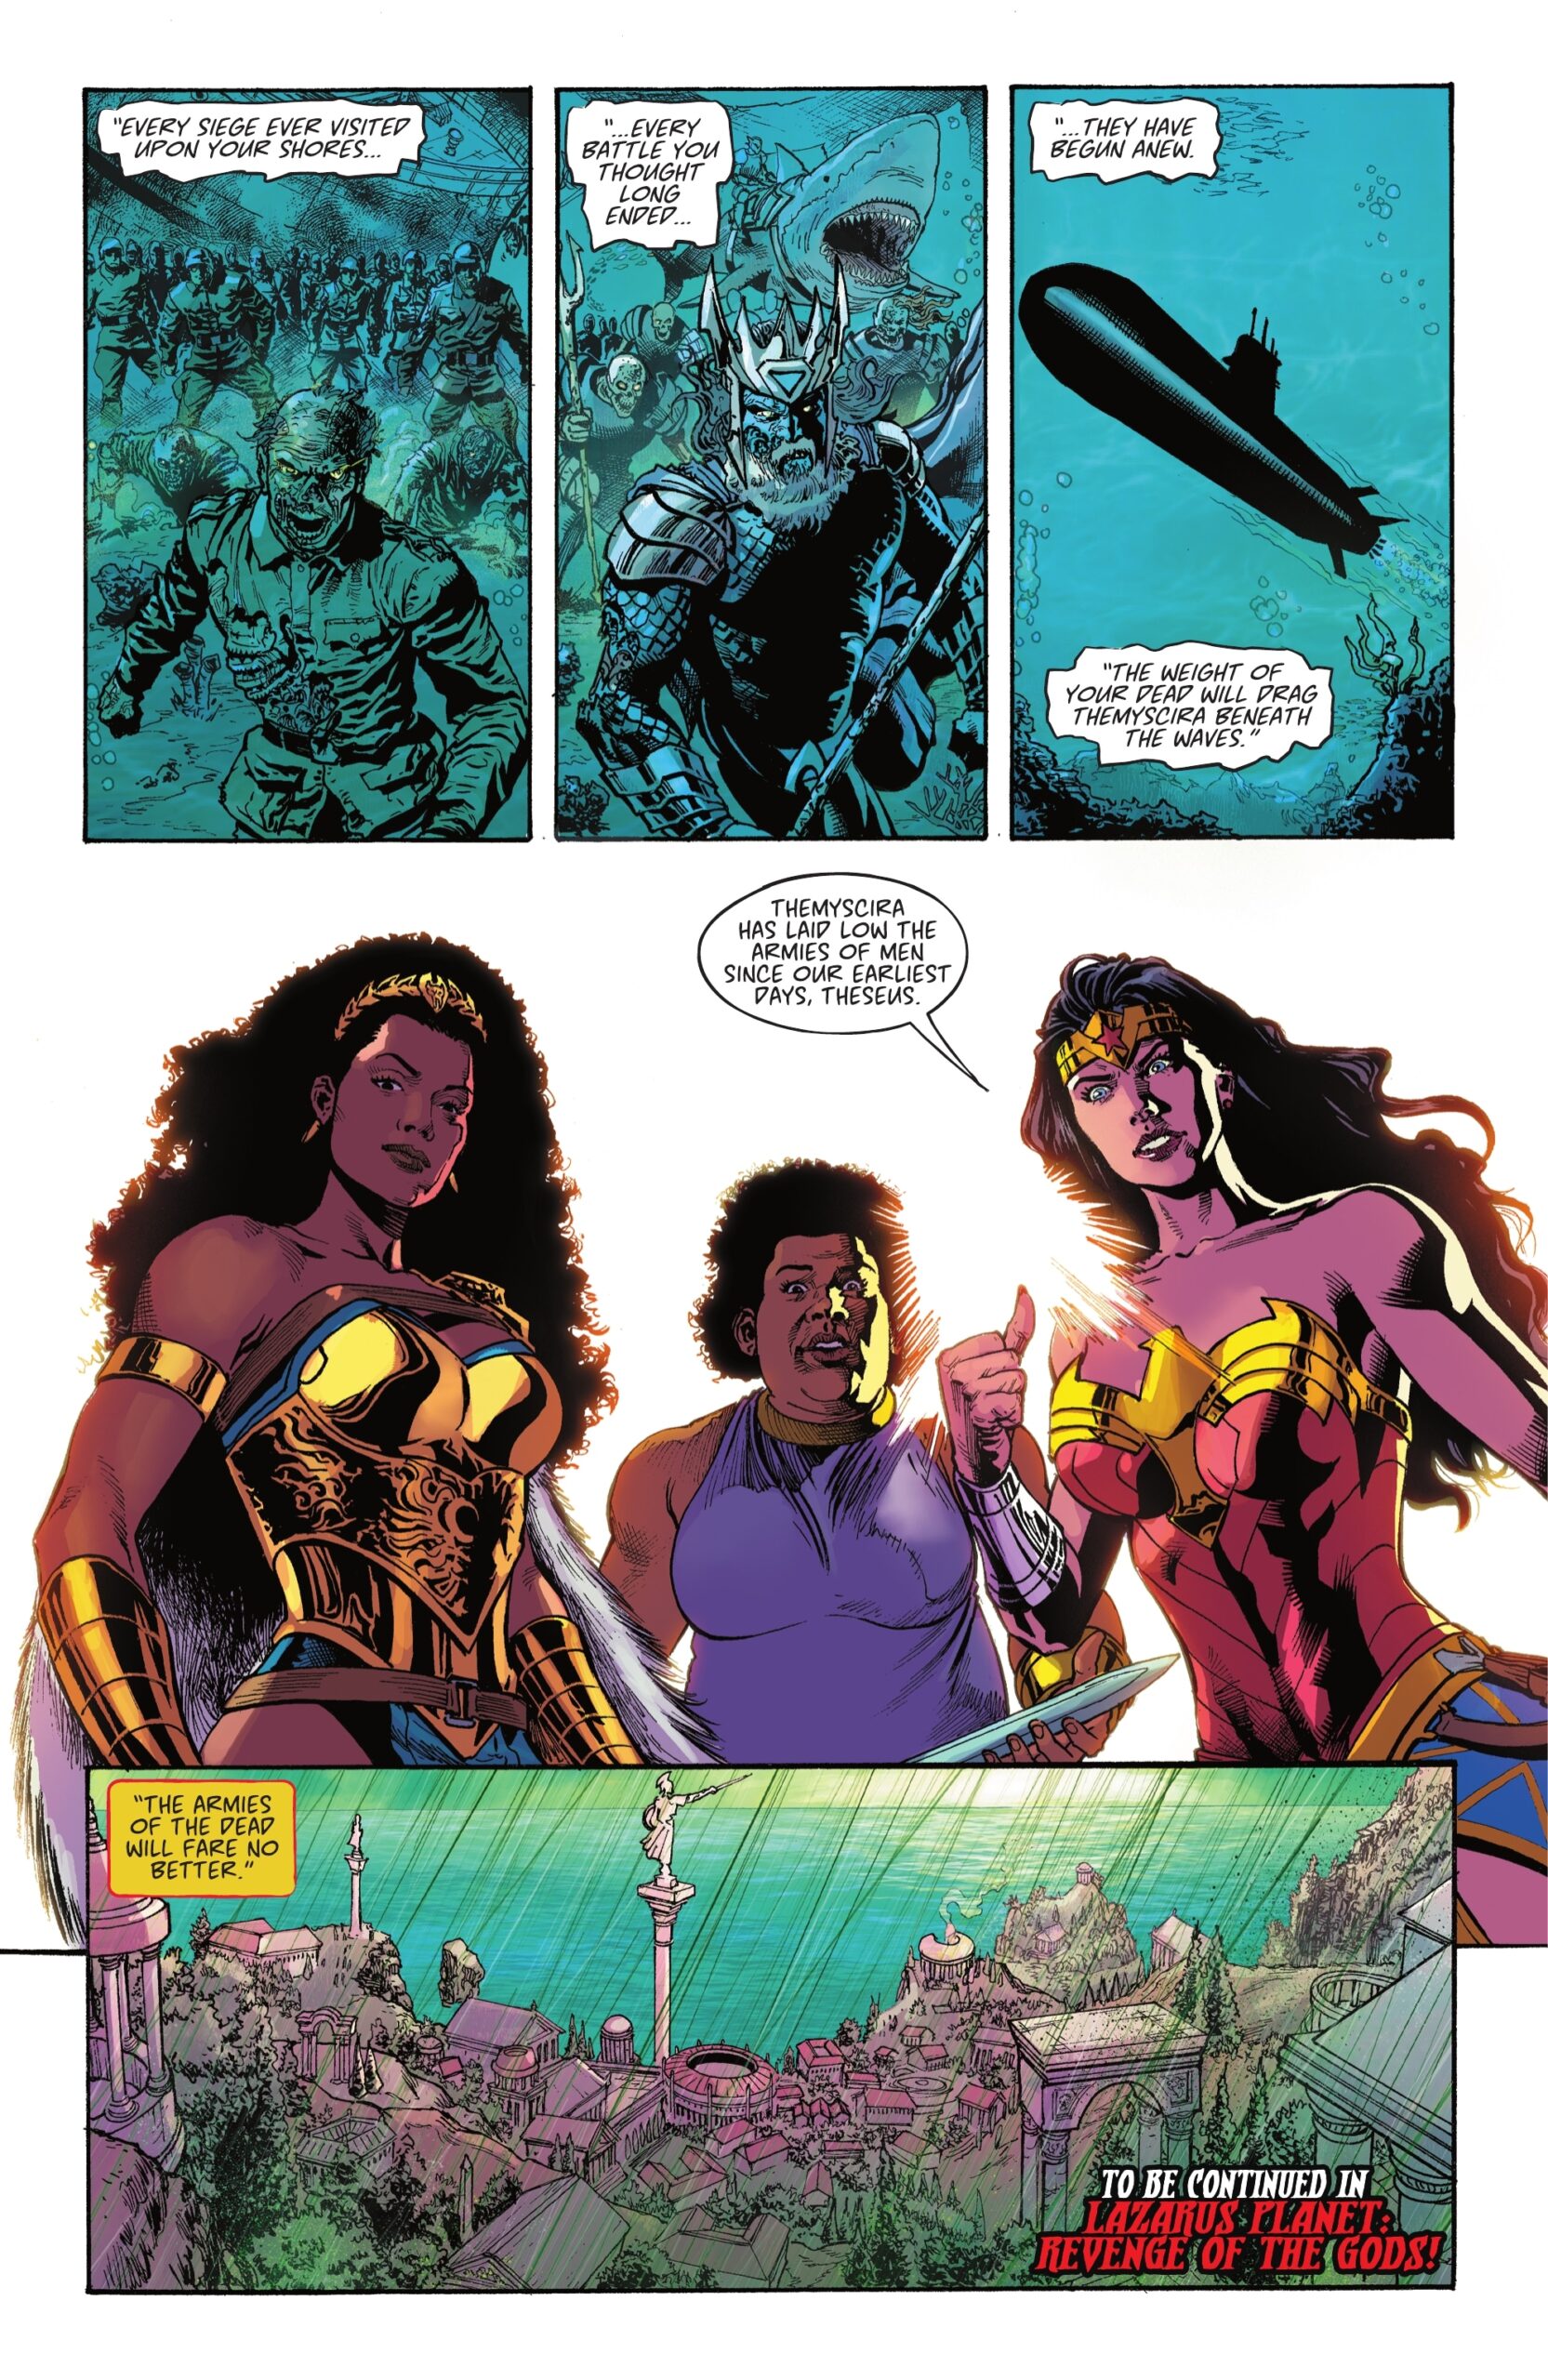 Hành tinh Lazarus Once We Were Gods #1 spoilers 16 Wonder Woman